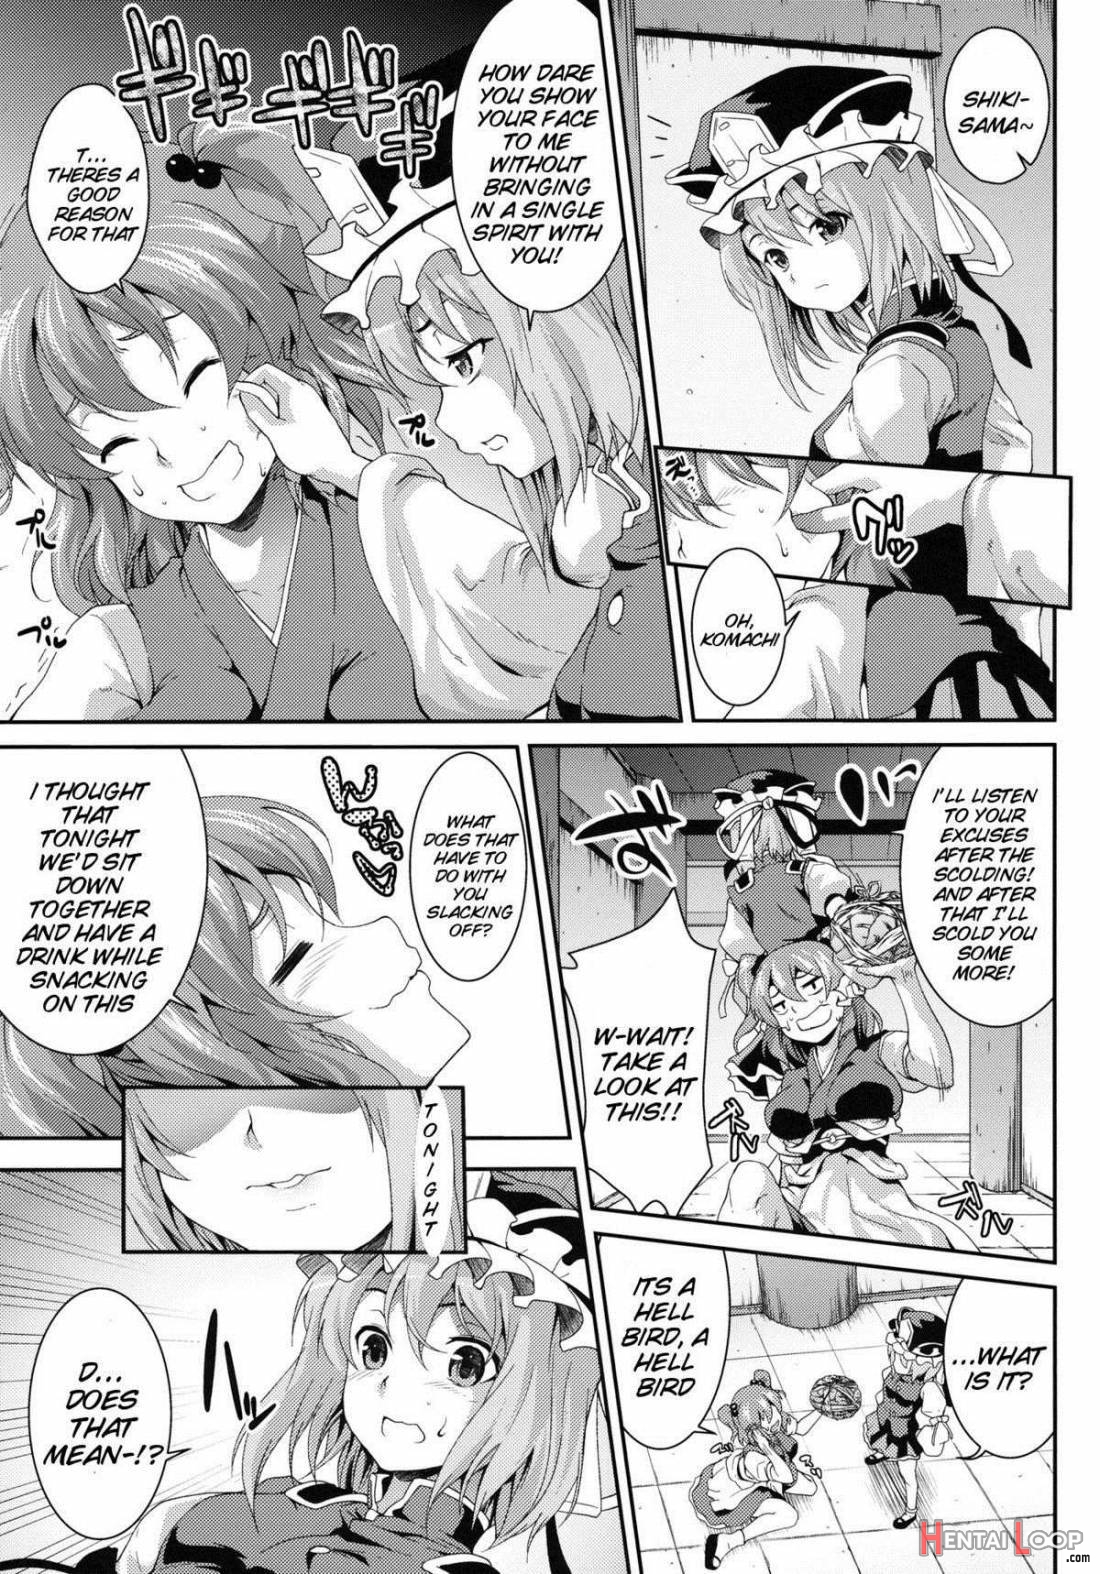 Together With Komachi 3 page 4